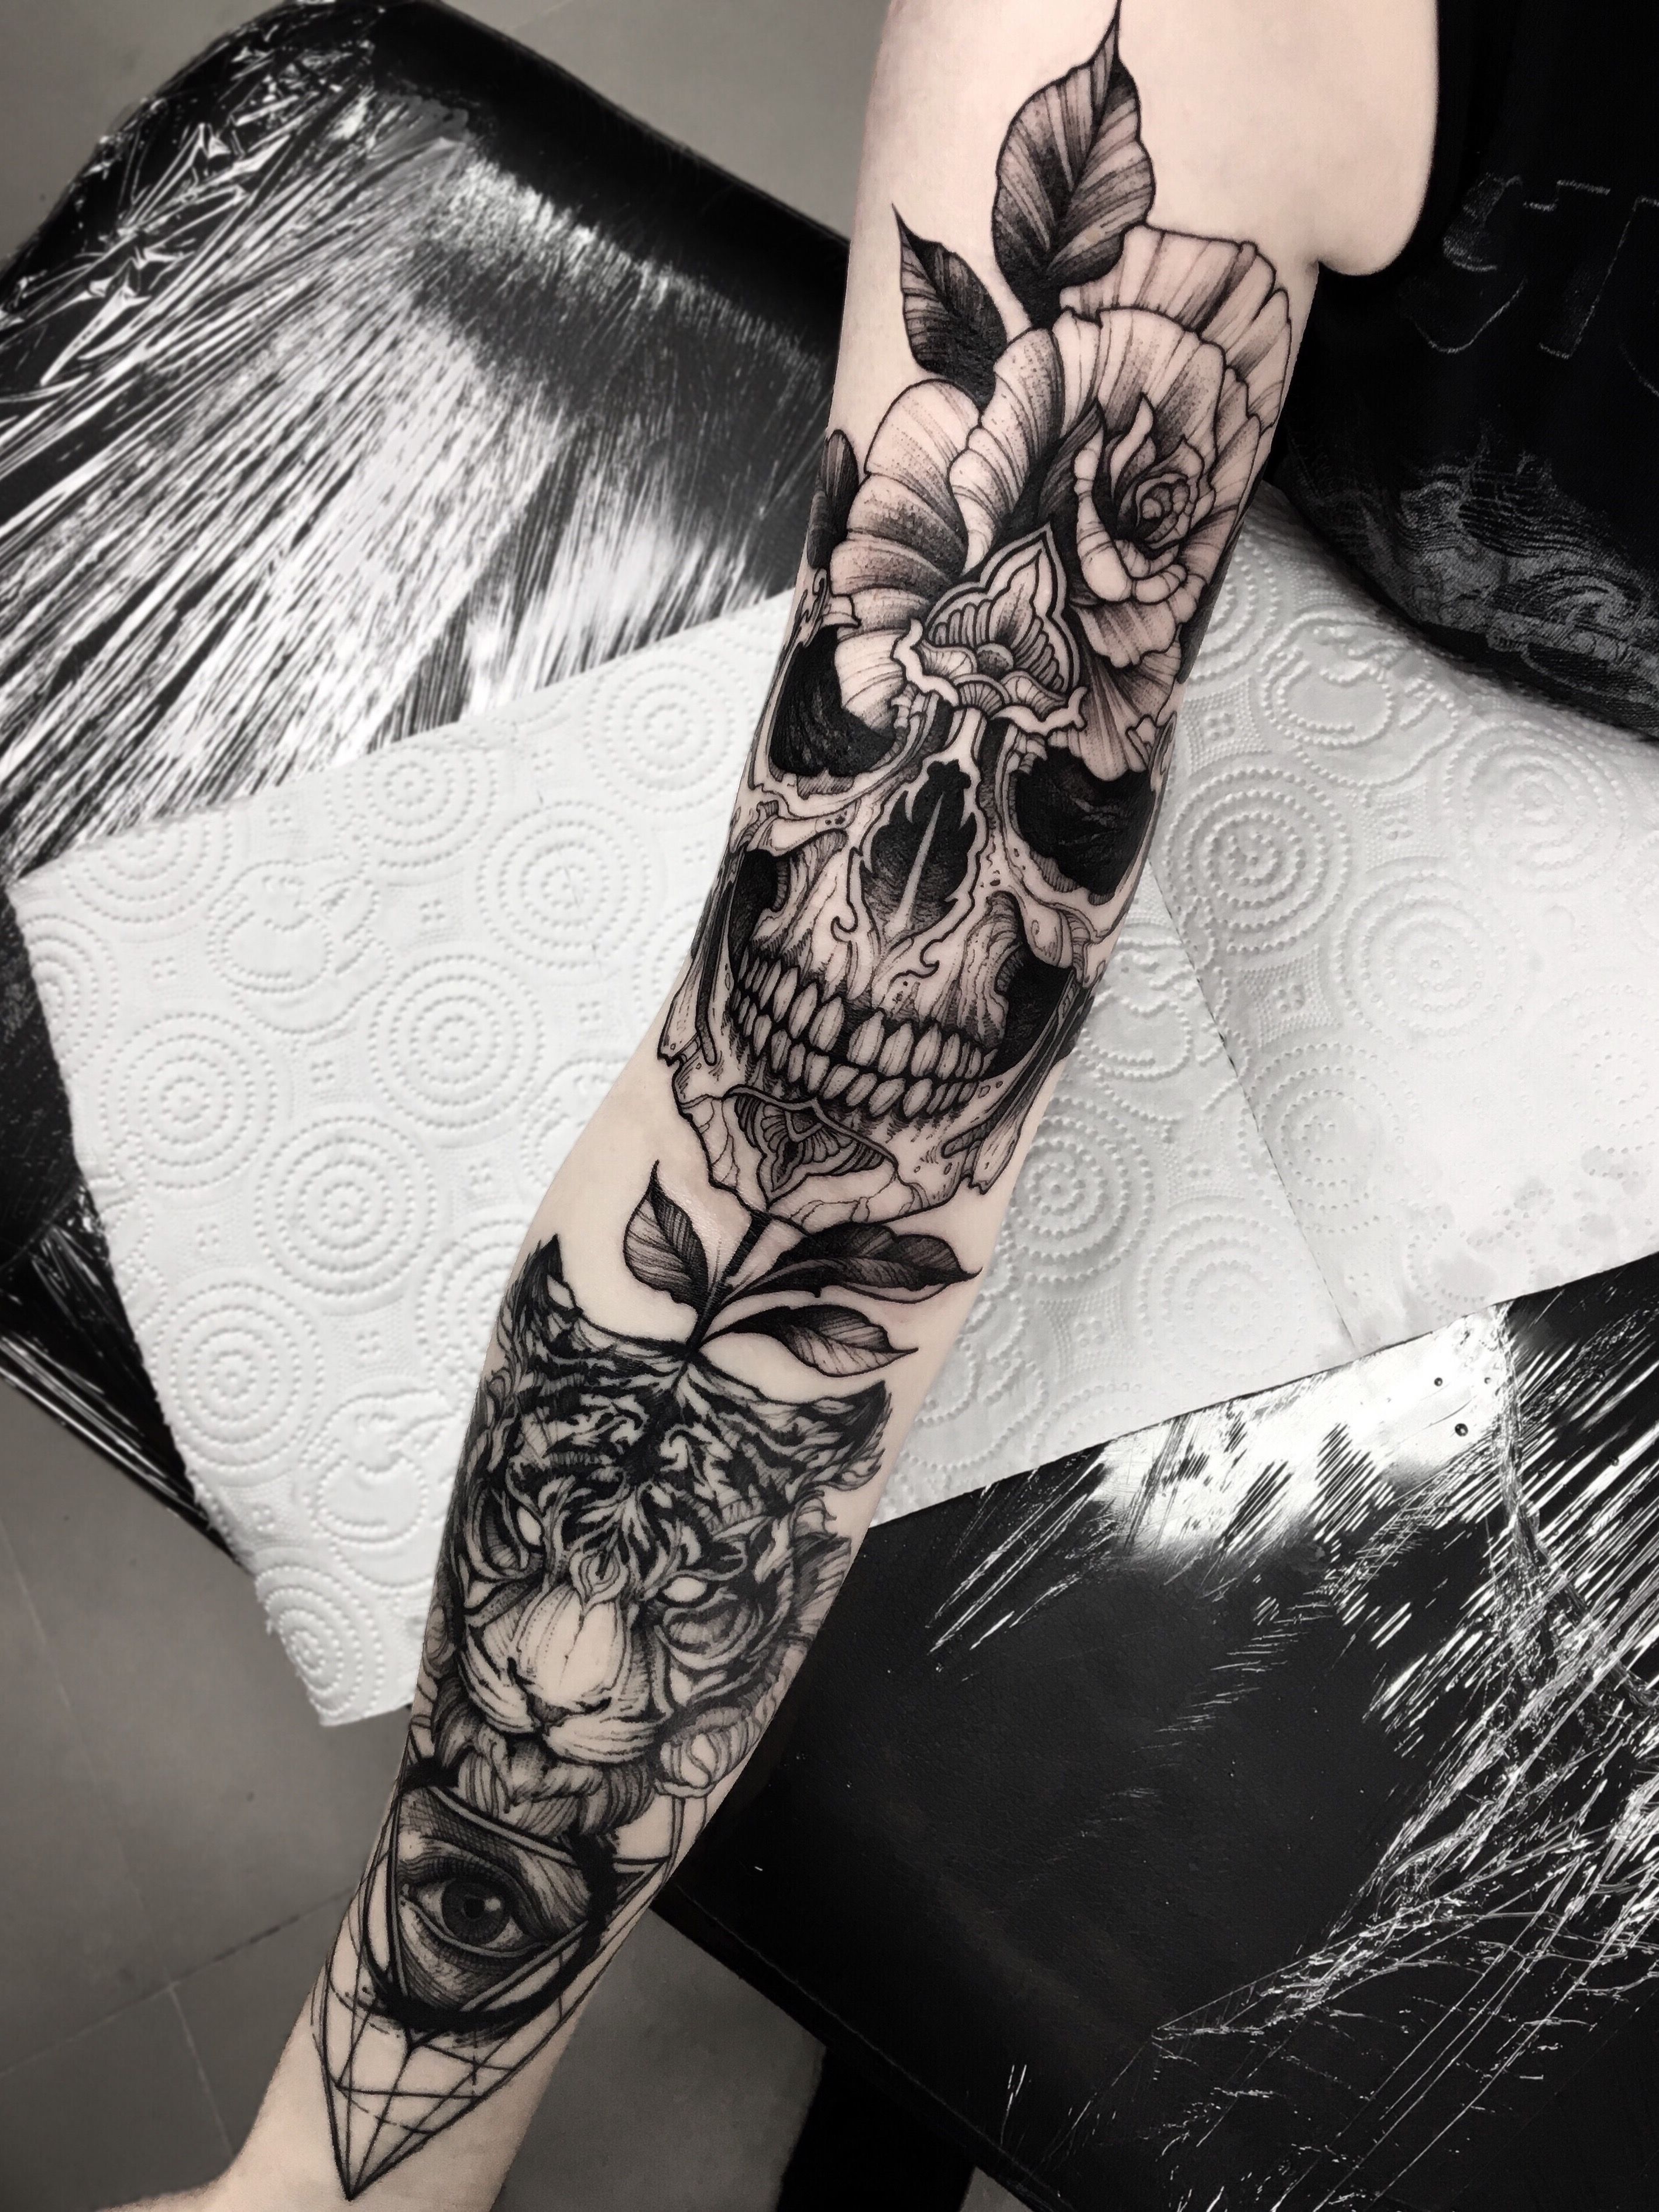 Continuation of my music inspired halfsleeve By Spencer Harker Dark Side Tattoo  Collective South Africa  rtattoos